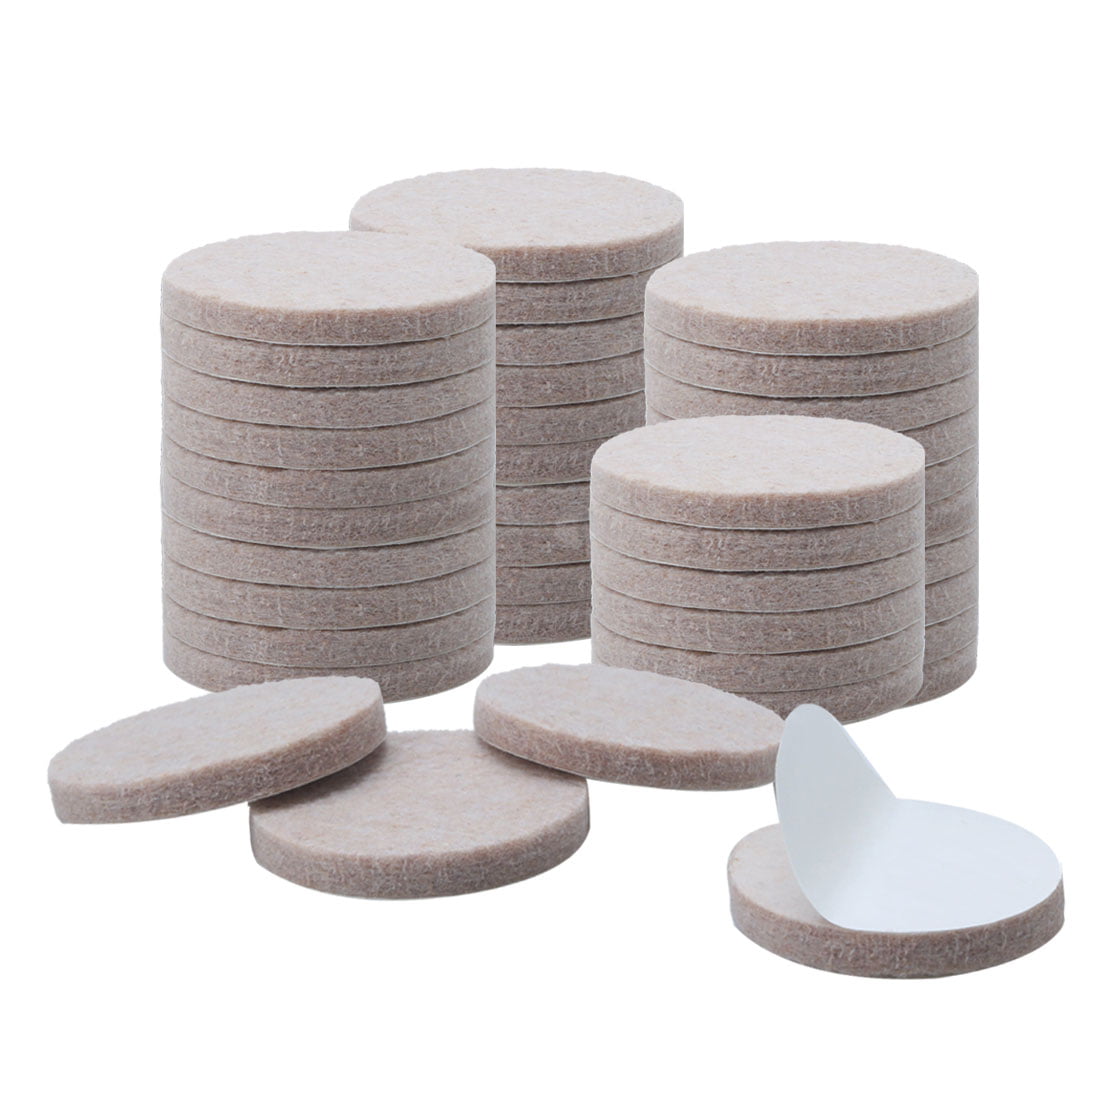 Self Adhesive Surface & Furniture Protective Felt Pads Scratch Resist 42mm Round 